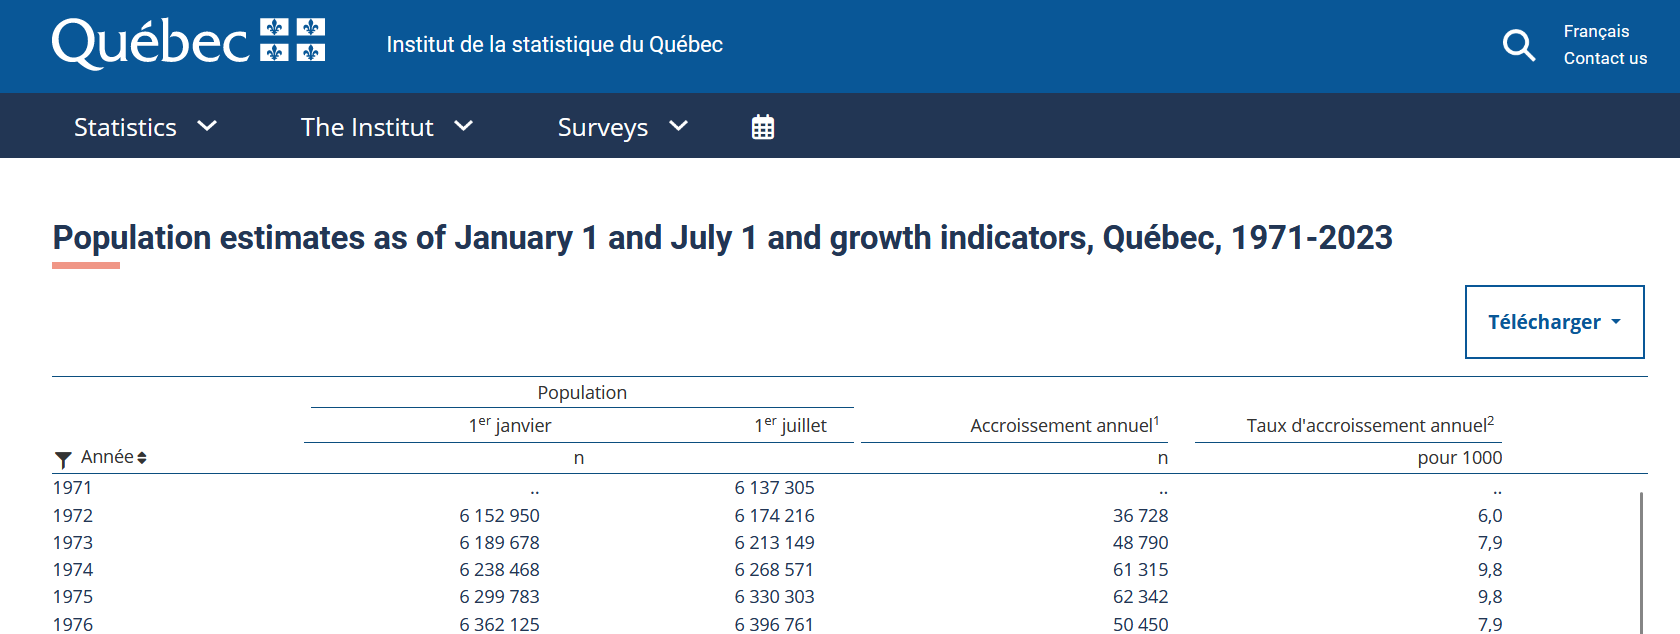 Population in Québec by year, from 1971-1976. Despite being an English page, there are many French words in the data.